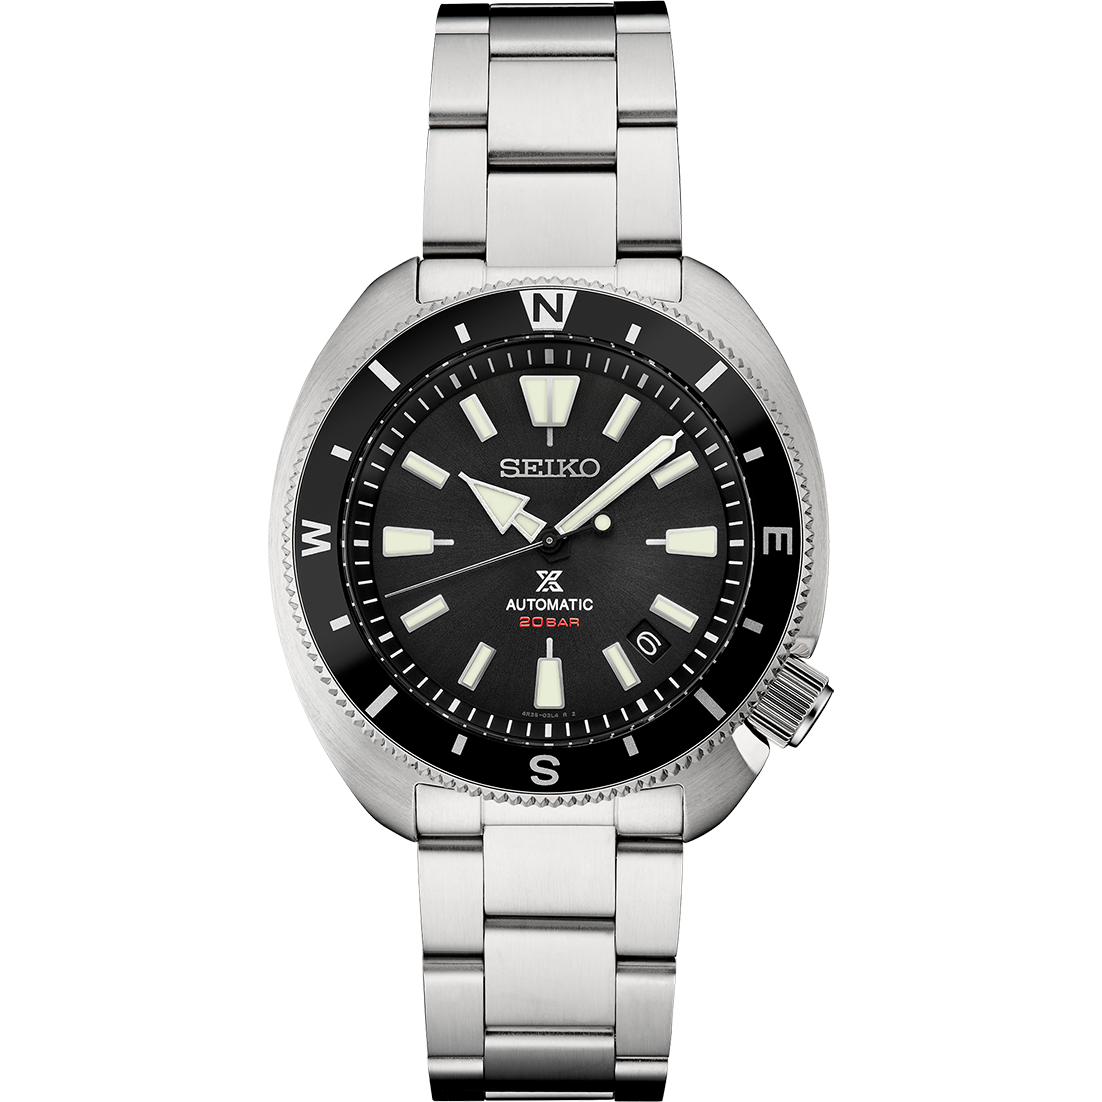 idiom snesevis charter GTS SEIKO AUTOMATIC PRESAGE BLACK STAINLESS STEEL – Fullers Jewelry